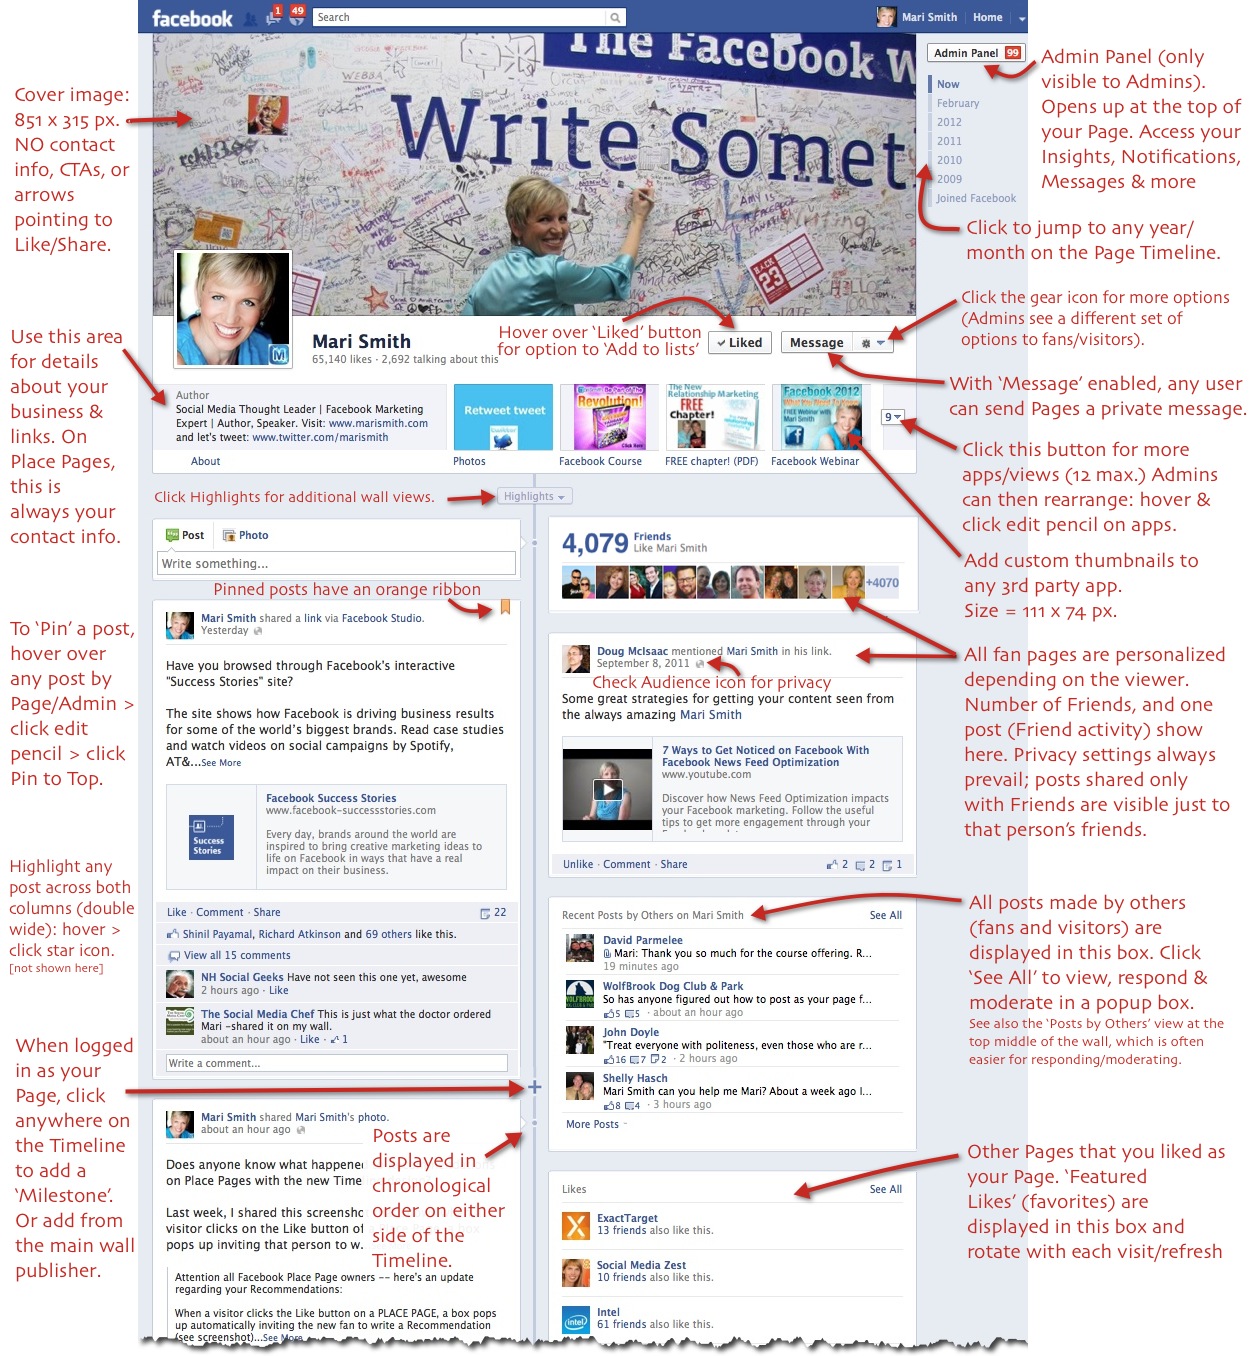 Facebook Timeline for Business Pages - 16 Key Points To Know